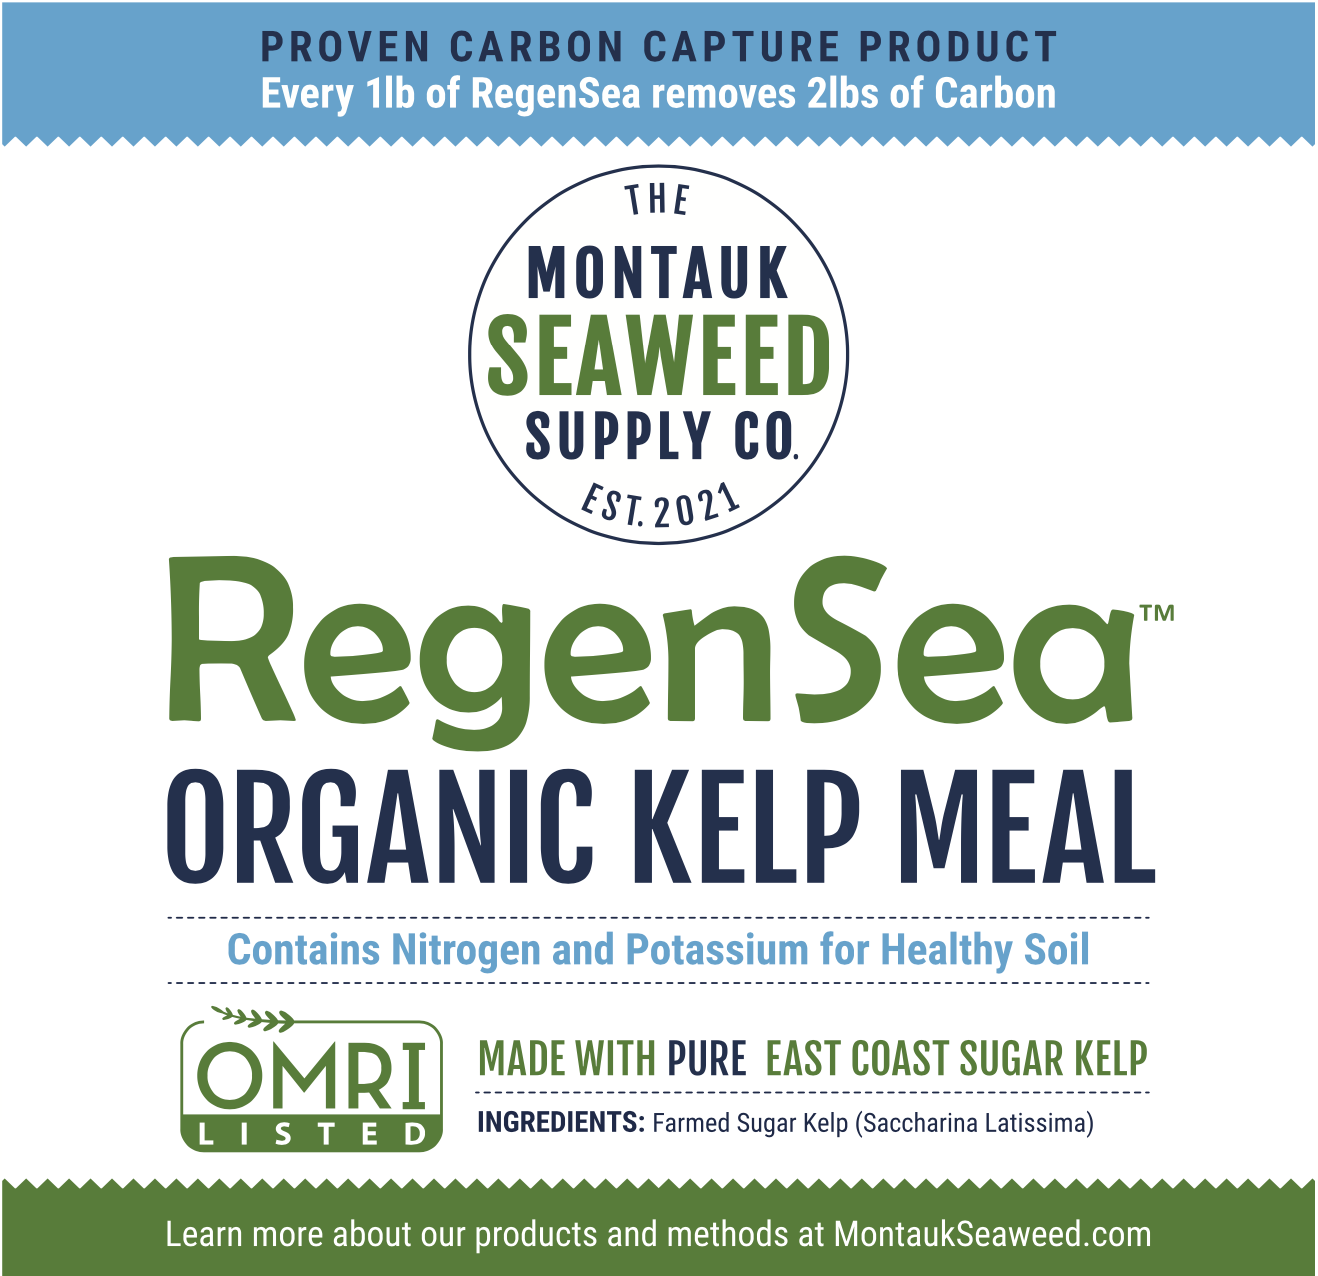 RegenSea Organic Kelp Meal. Proven carbon capture product. Every 1lb of RegenSea removes 2lbs of carbon. Contains nitrogen and potassium for healthy soil. OMRI Listed. Made with pure east coast sugar kelp. 